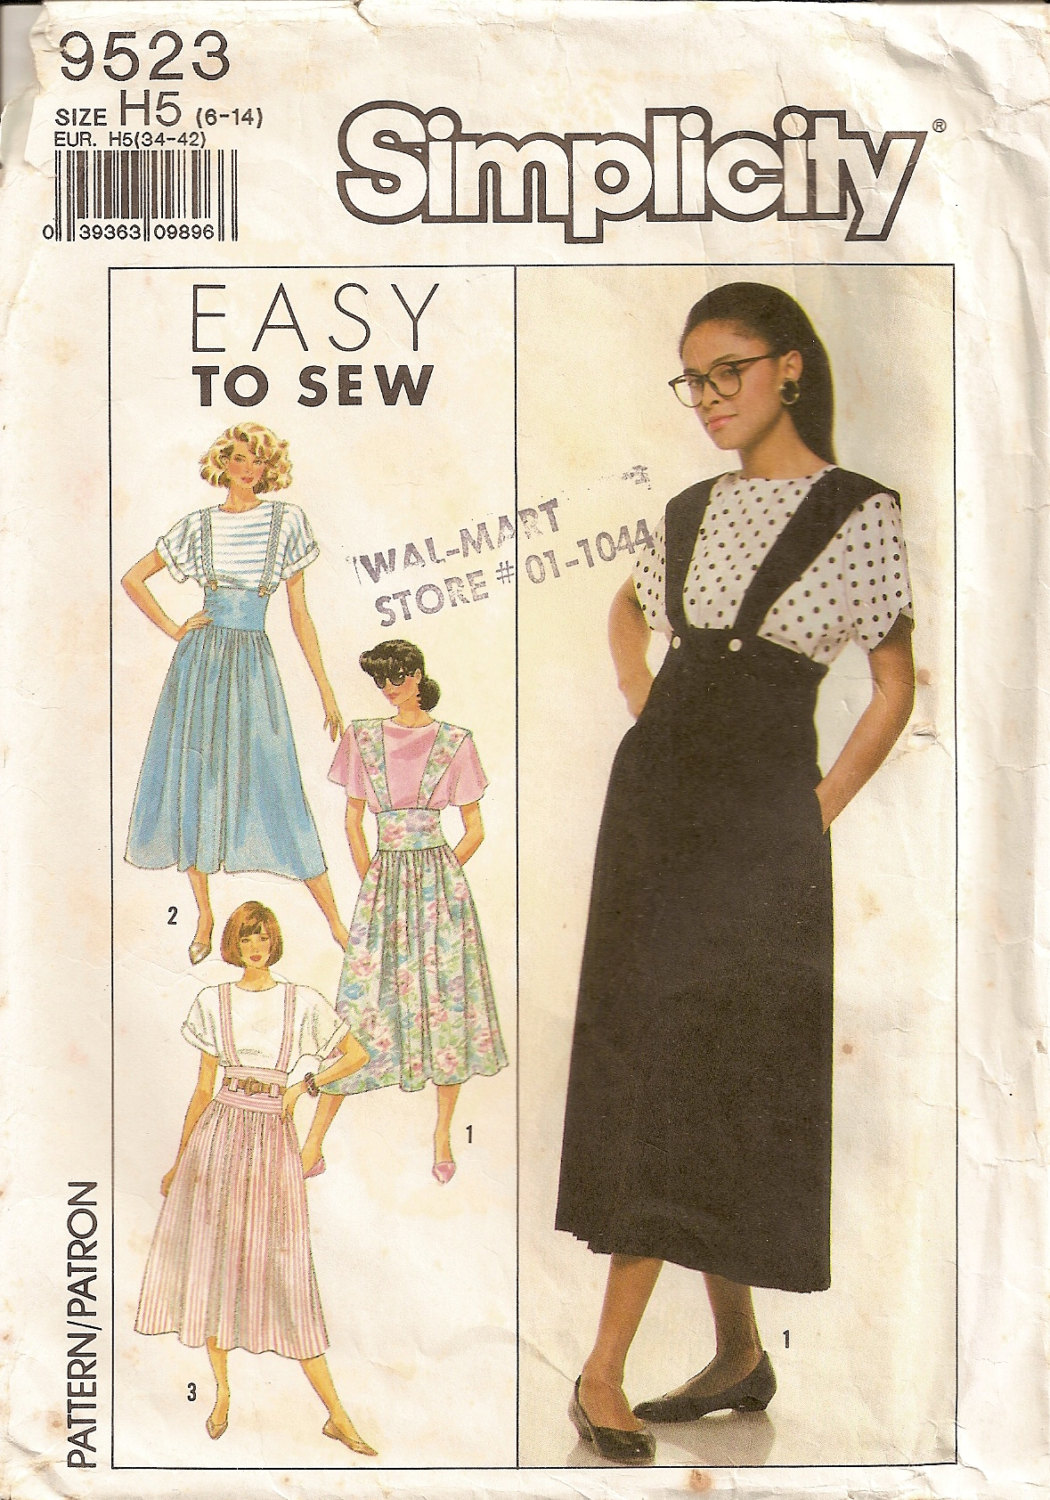 Simplicity 9523 sewing pattern misses clothing suspender